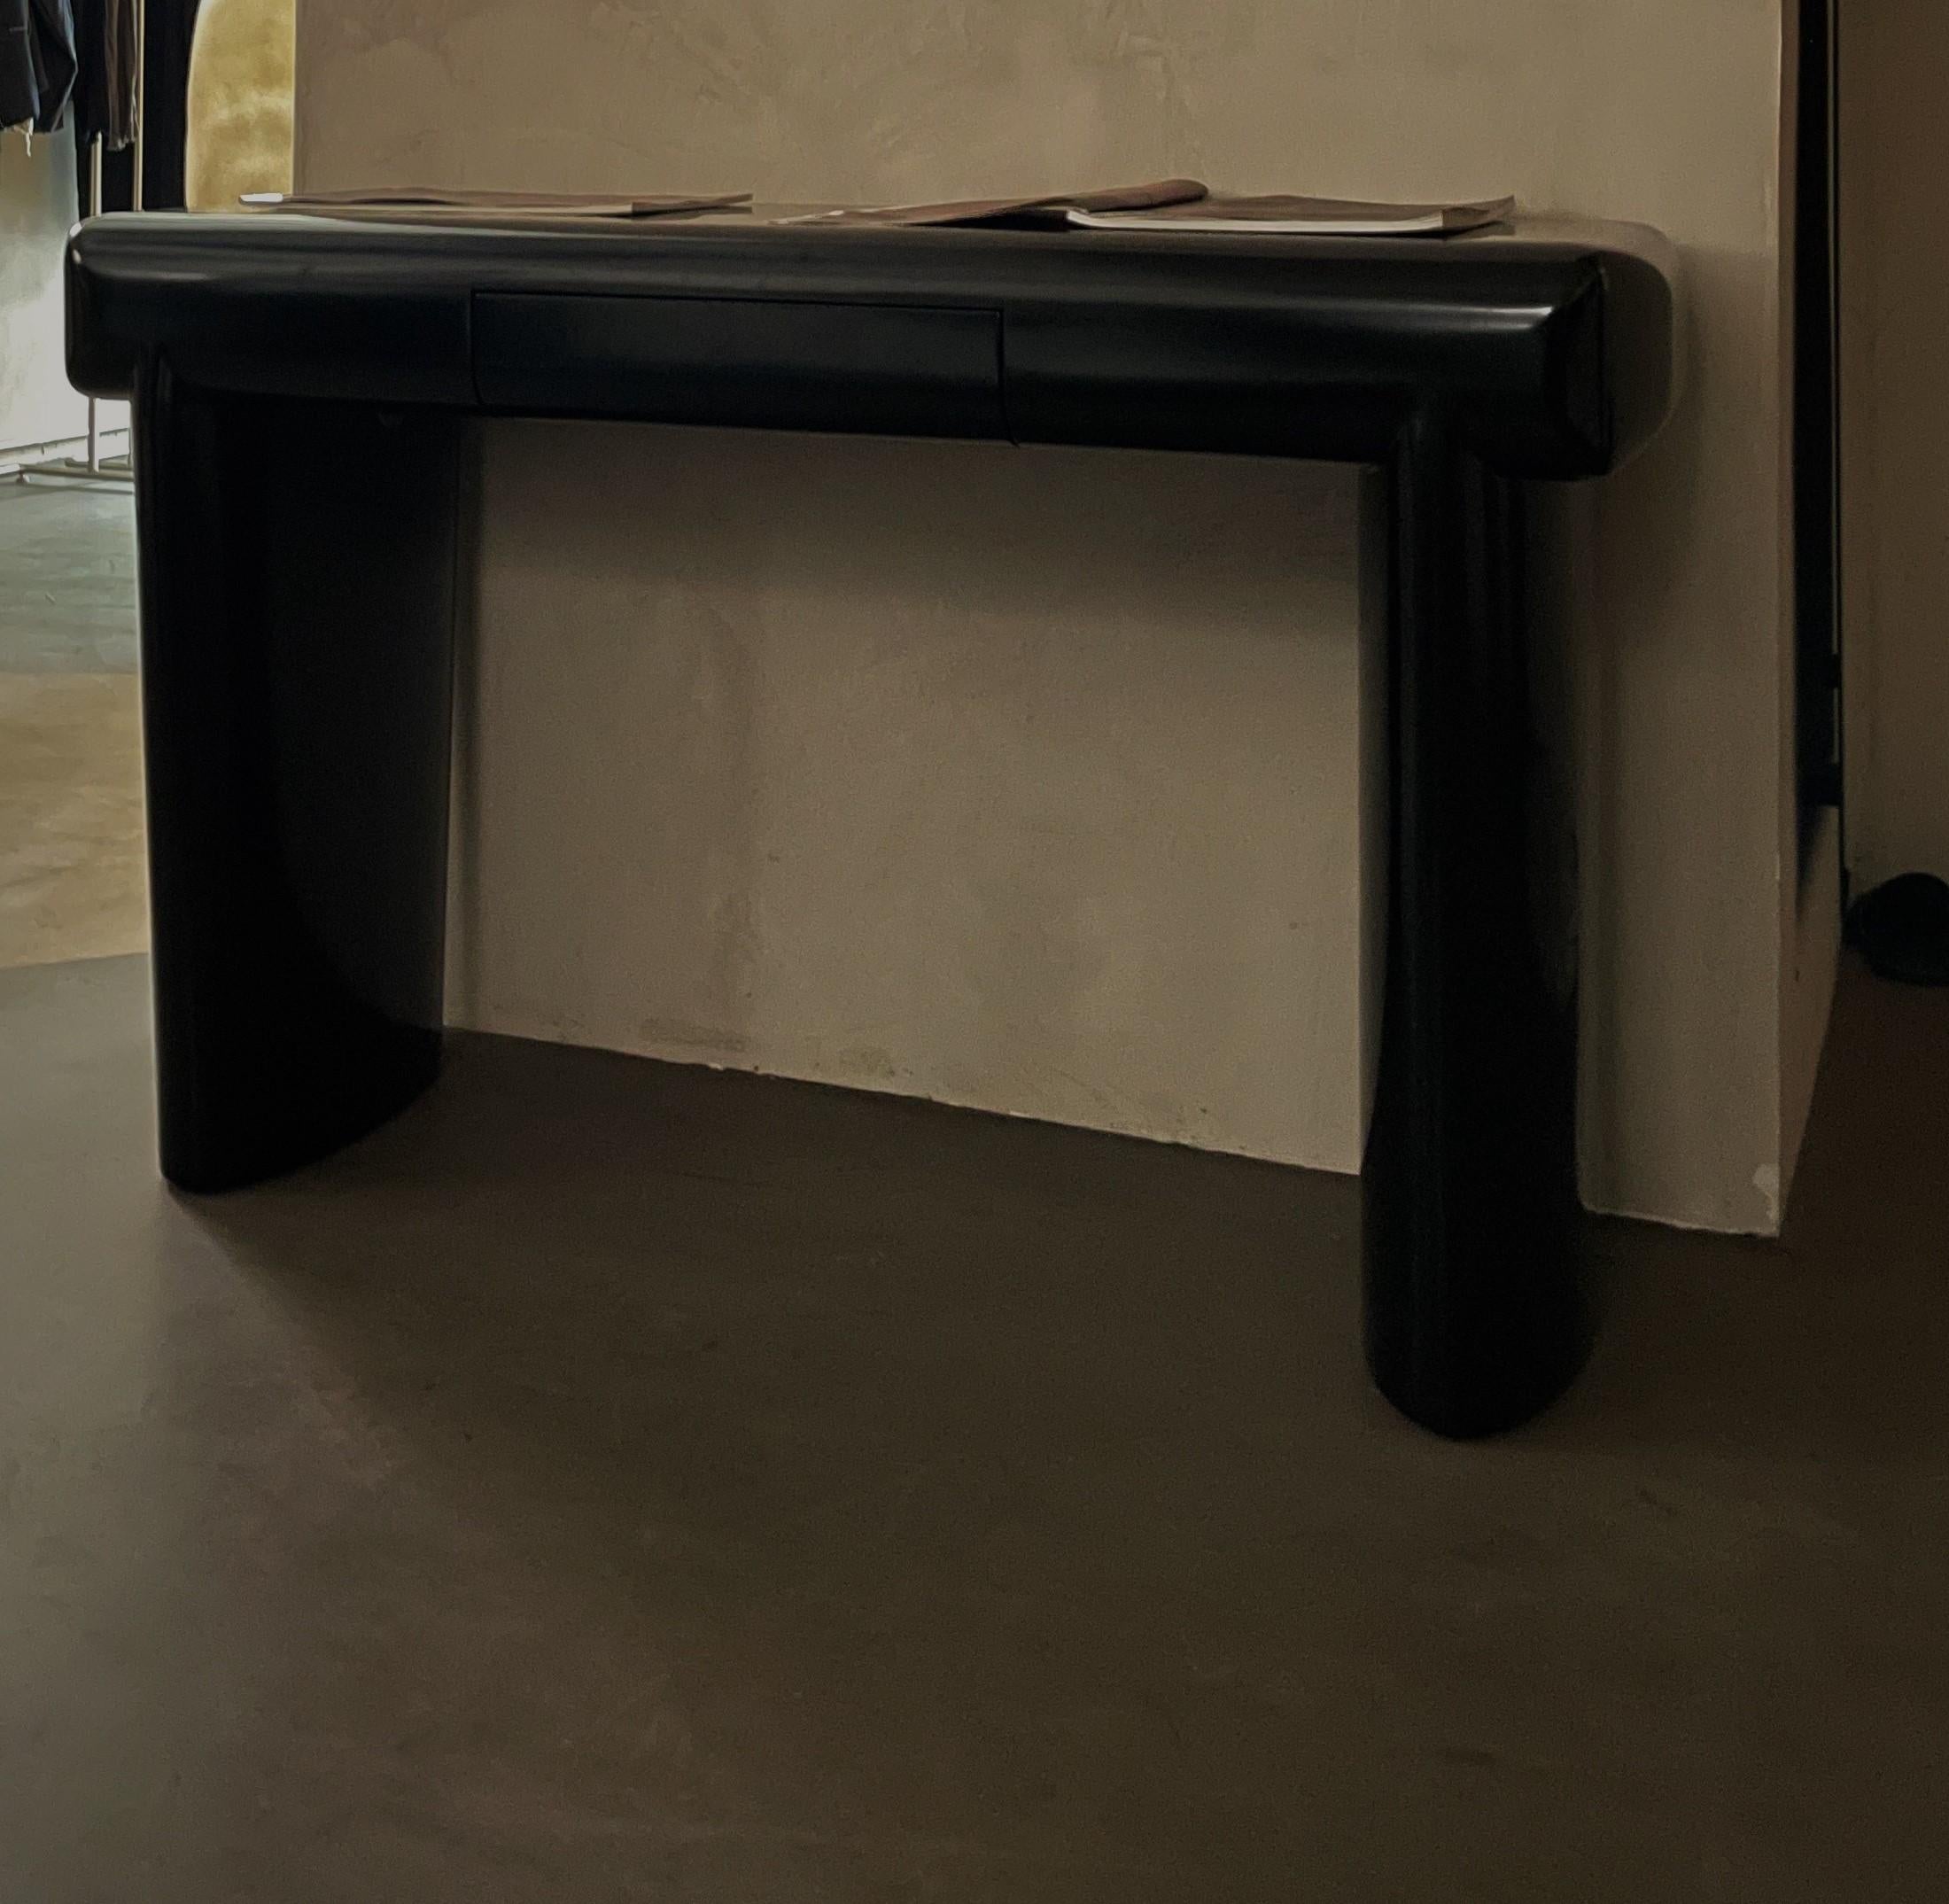 Lifting desk by Karstudio
Dimensions: W 120 x D 45 x H 75 cm
Materials: MDF Frame
Available in black.

Kar, is the root of Sanskrit Karma, meaning karmic repetition. We seek the cause and effect in aesthetics, inspired from the past, the